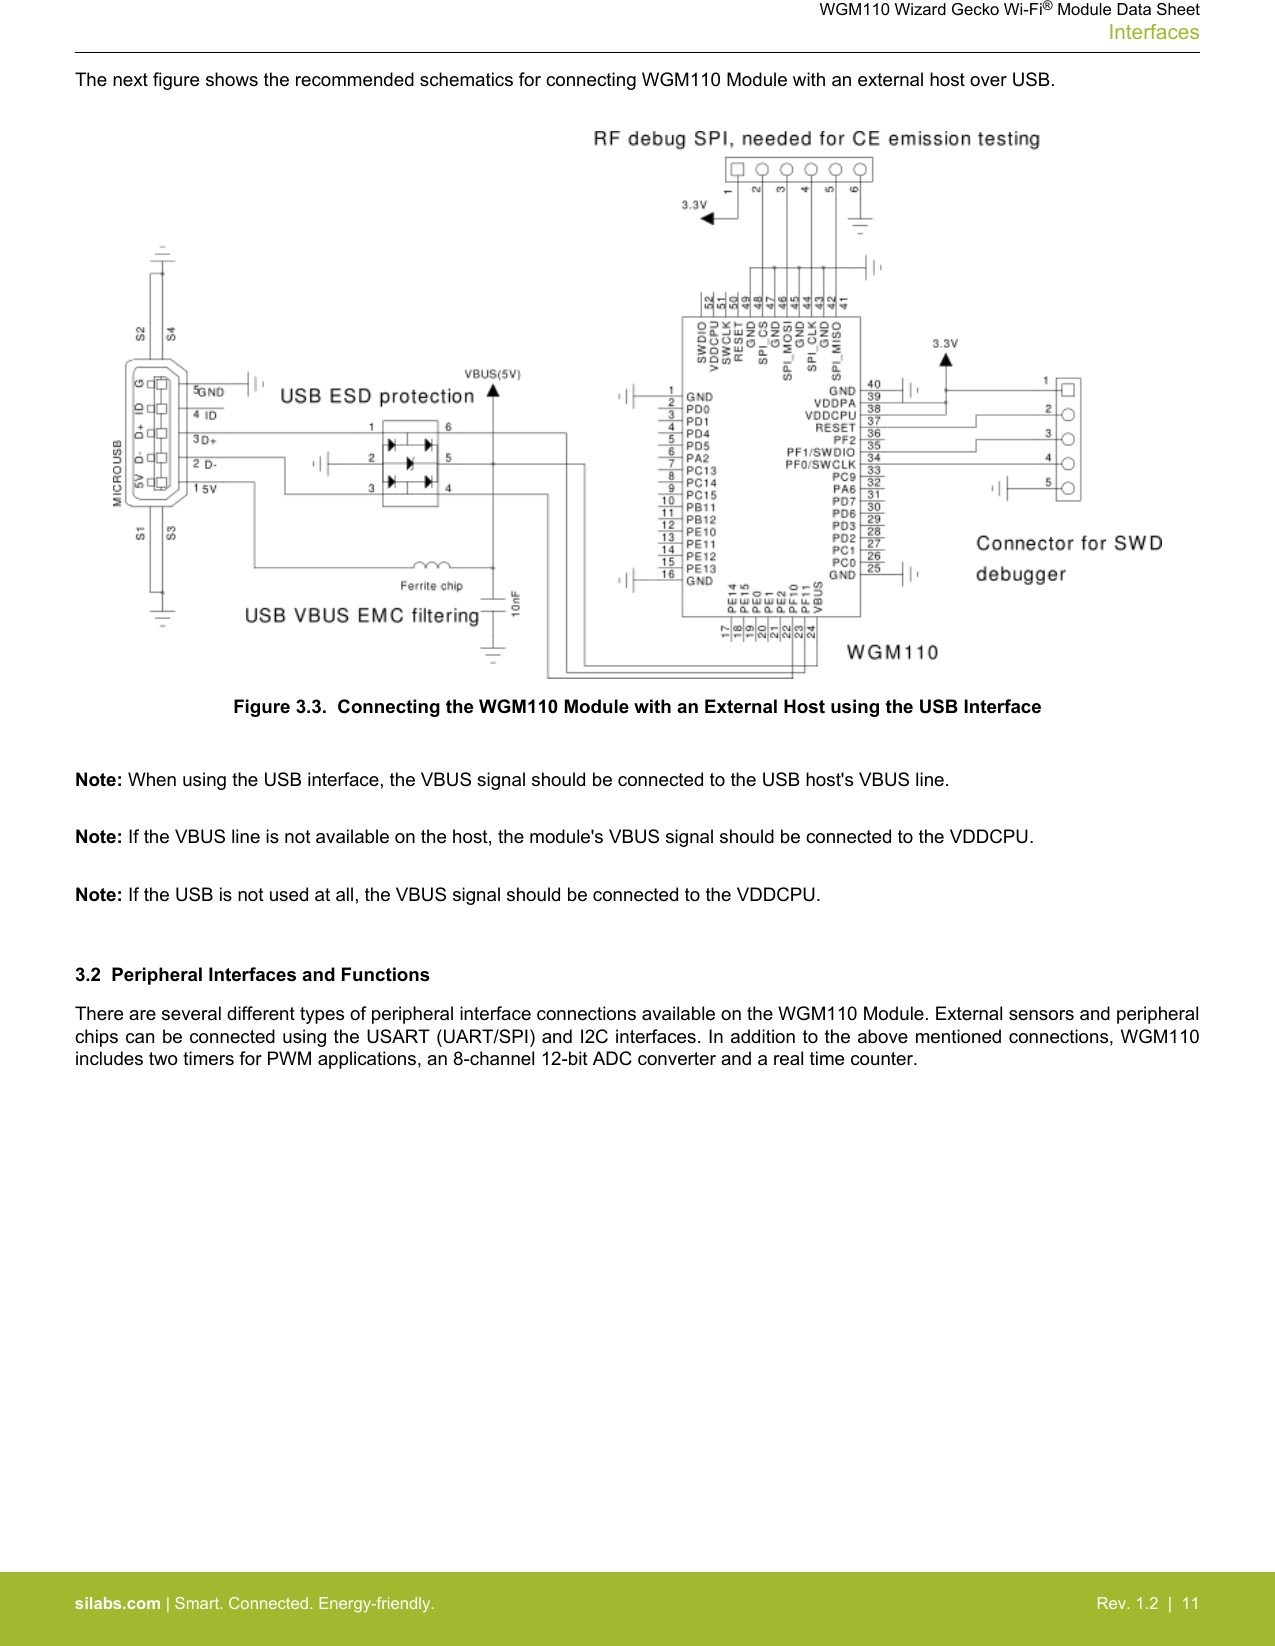 The next figure shows the recommended schematics for connecting WGM110 Module with an external host over USB.Figure 3.3.  Connecting the WGM110 Module with an External Host using the USB InterfaceNote: When using the USB interface, the VBUS signal should be connected to the USB host&apos;s VBUS line. Note: If the VBUS line is not available on the host, the module&apos;s VBUS signal should be connected to the VDDCPU. Note: If the USB is not used at all, the VBUS signal should be connected to the VDDCPU. 3.2  Peripheral Interfaces and FunctionsThere are several different types of peripheral interface connections available on the WGM110 Module. External sensors and peripheralchips can be connected using the USART (UART/SPI) and I2C interfaces. In addition to the above mentioned connections, WGM110includes two timers for PWM applications, an 8-channel 12-bit ADC converter and a real time counter.WGM110 Wizard Gecko Wi-Fi® Module Data SheetInterfacessilabs.com | Smart. Connected. Energy-friendly. Rev. 1.2  |  11